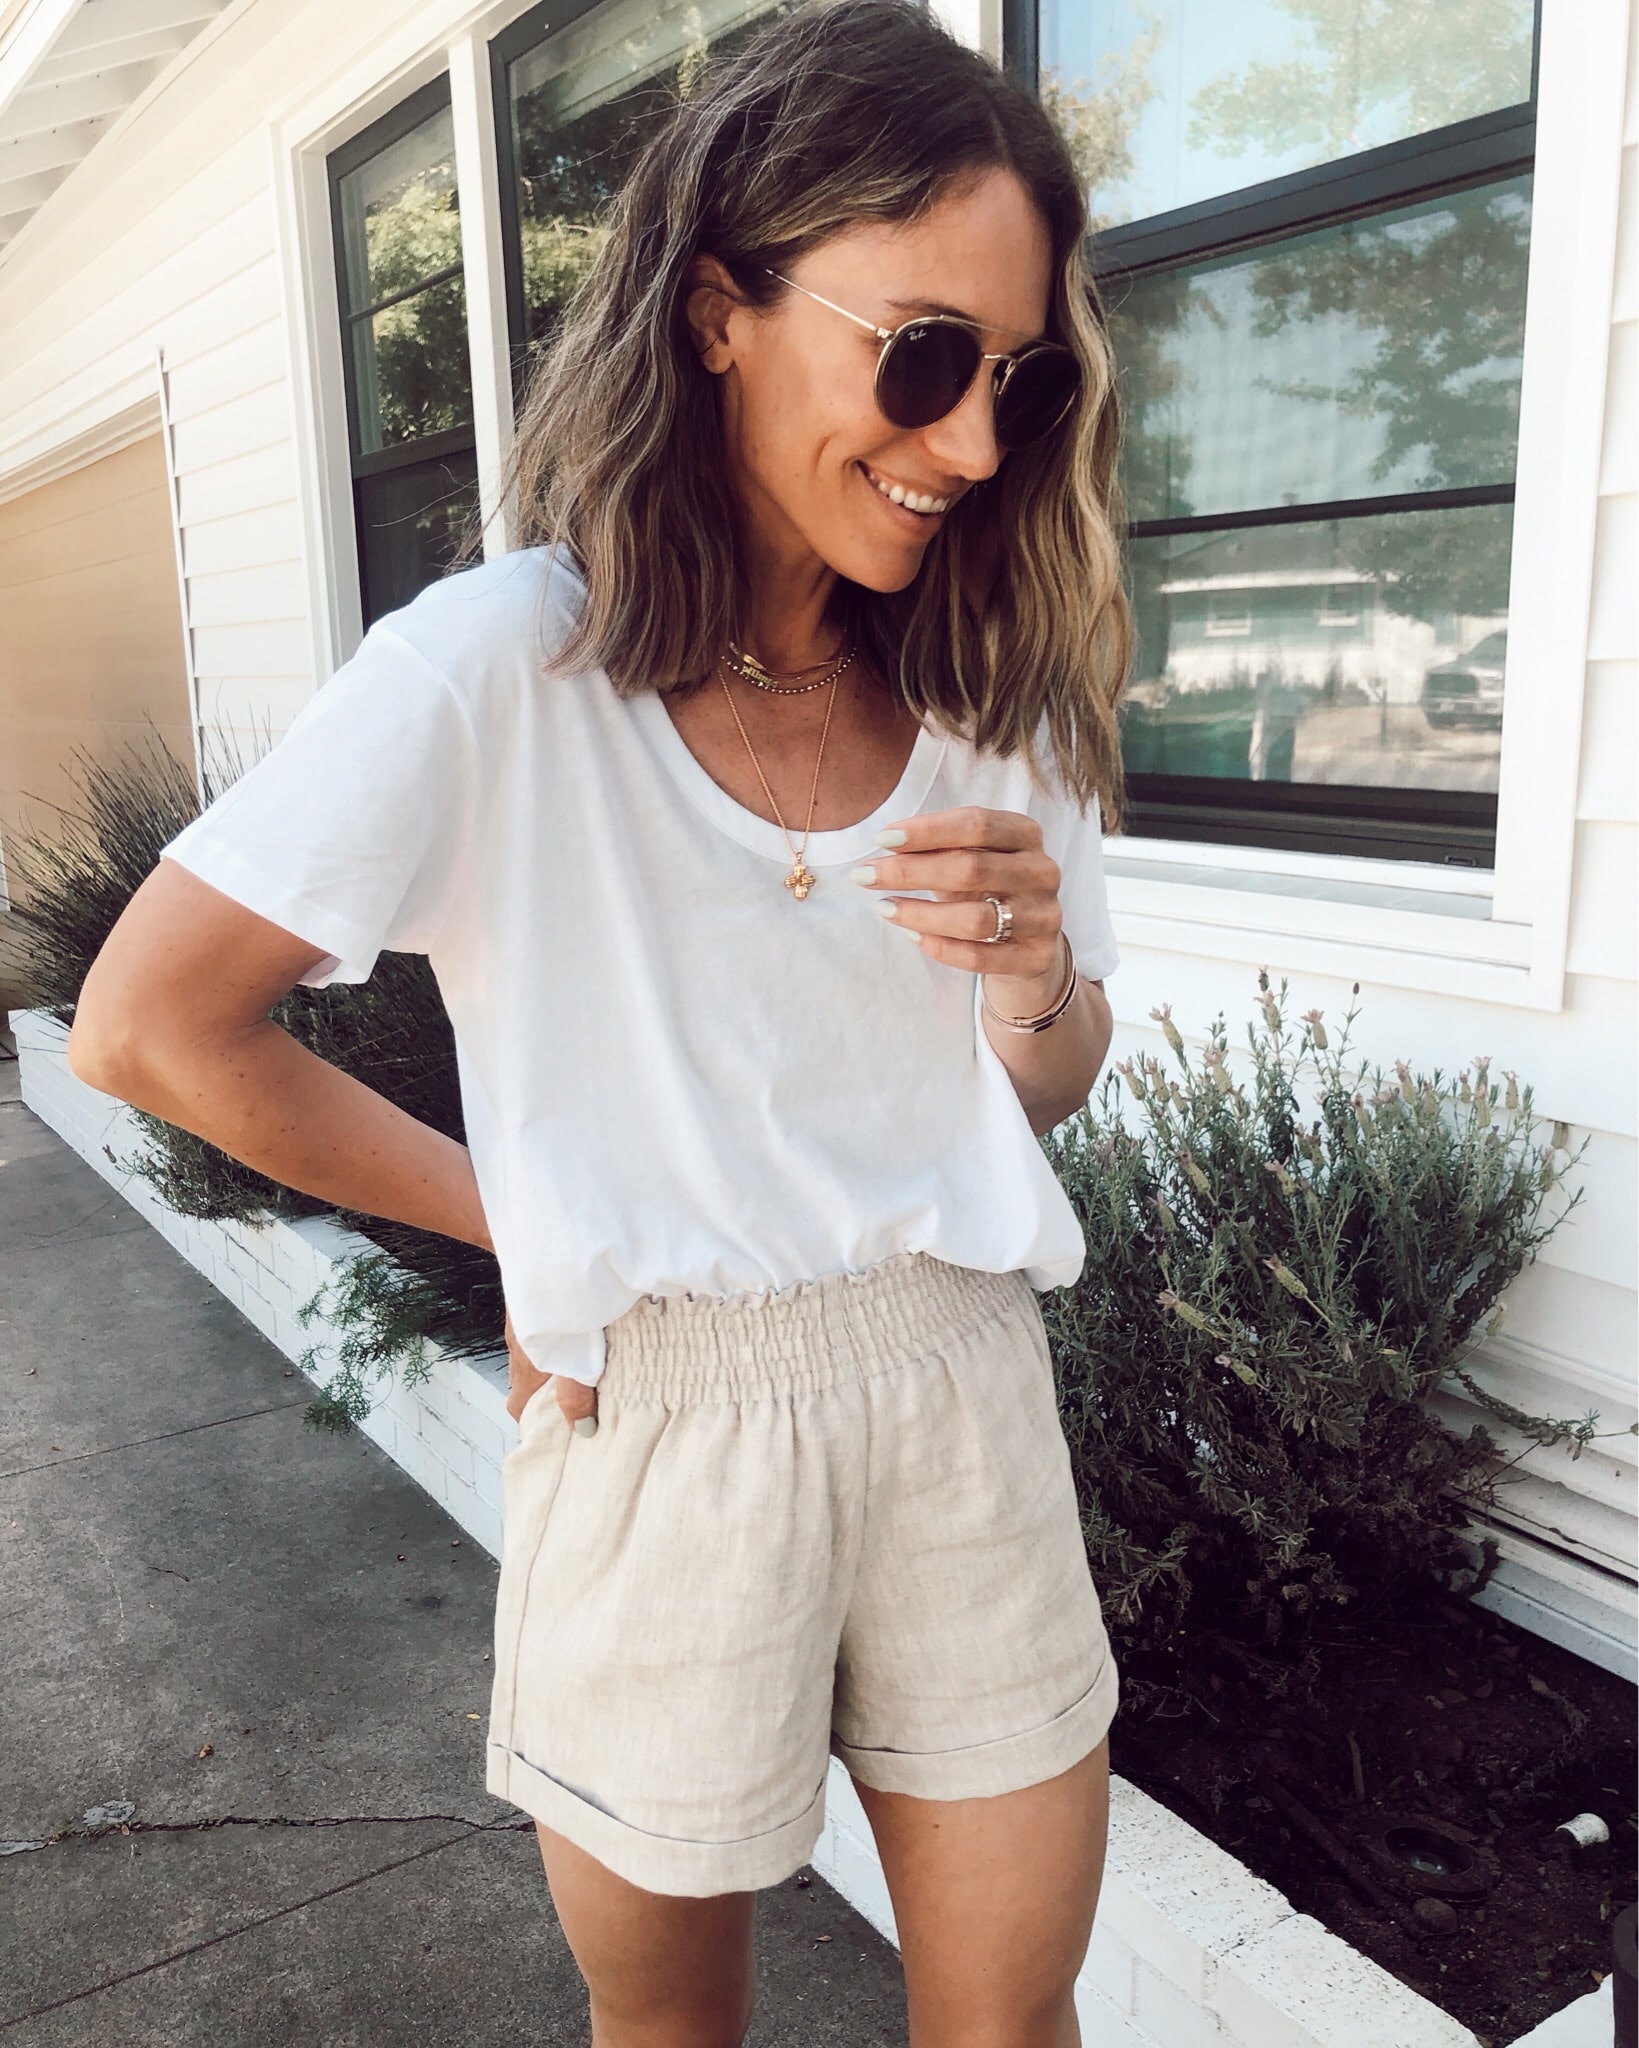 Everyday Style || 8 Ways To Wear Linen Shorts - posts from Shannon Pulsifer